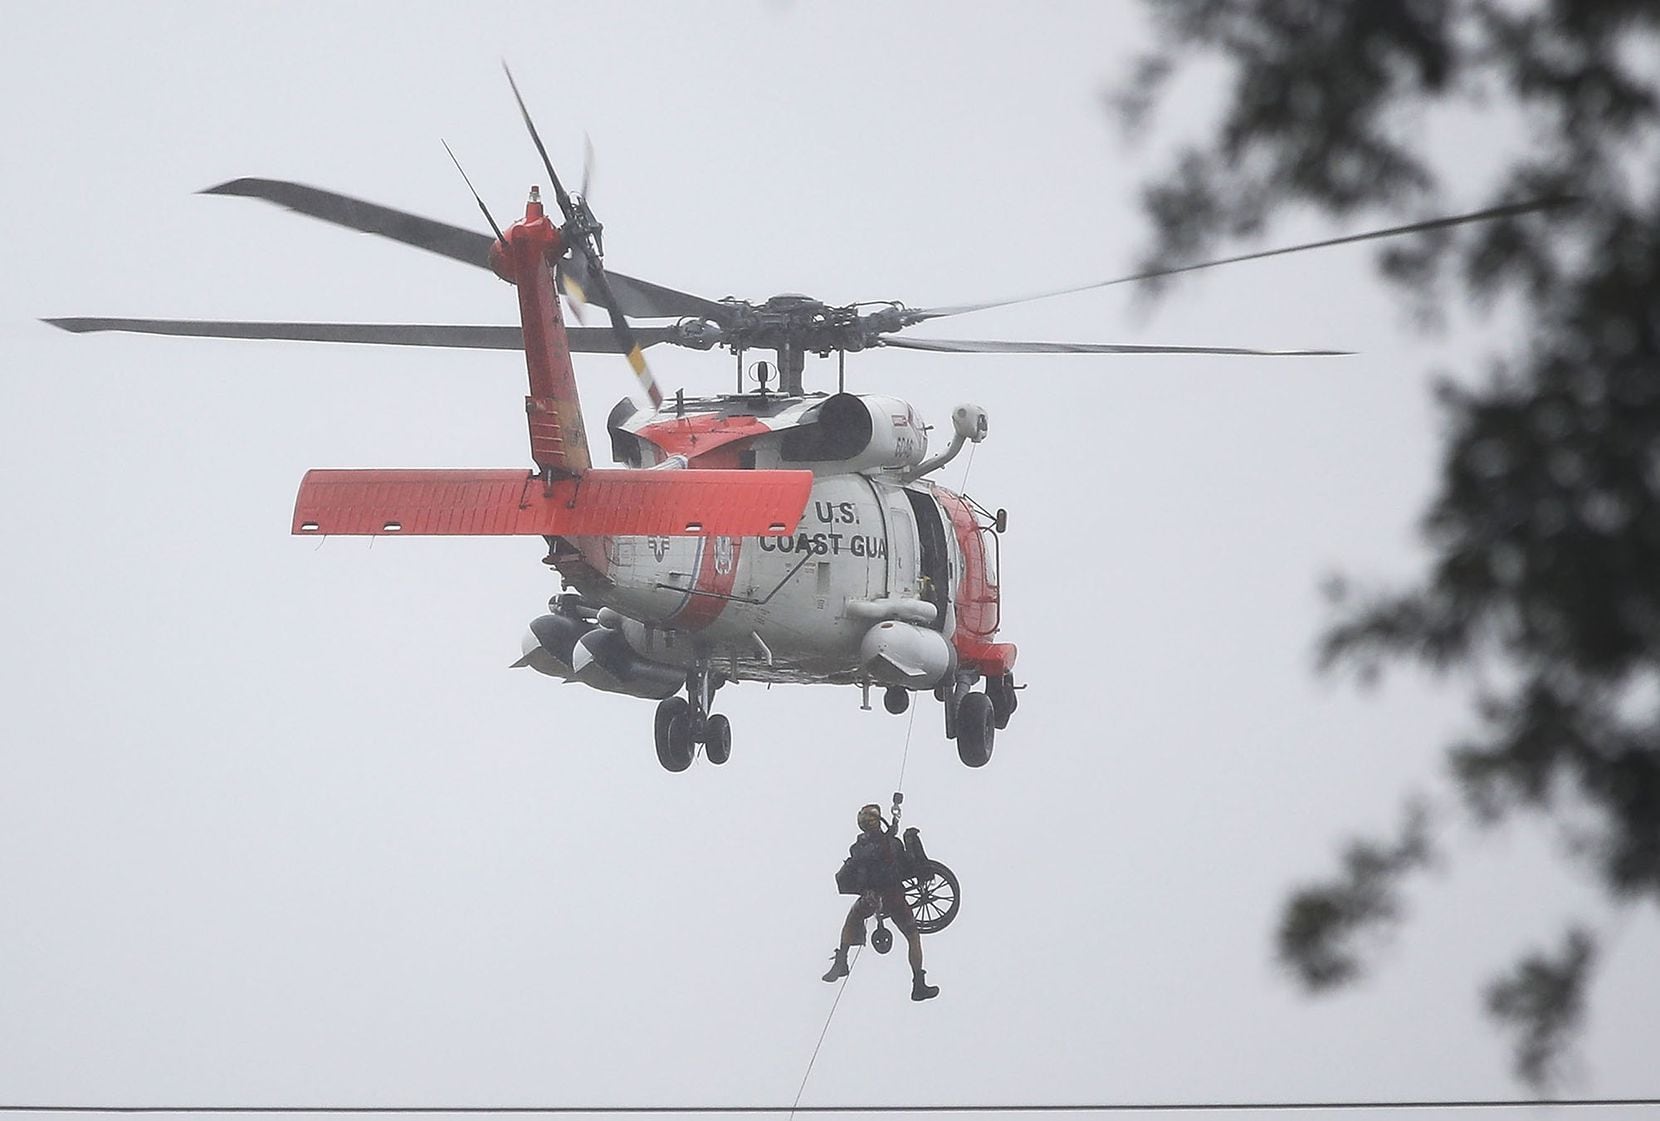 A Coast Guard helicopter hoists a wheel chair on board after lifting a person to safety ...